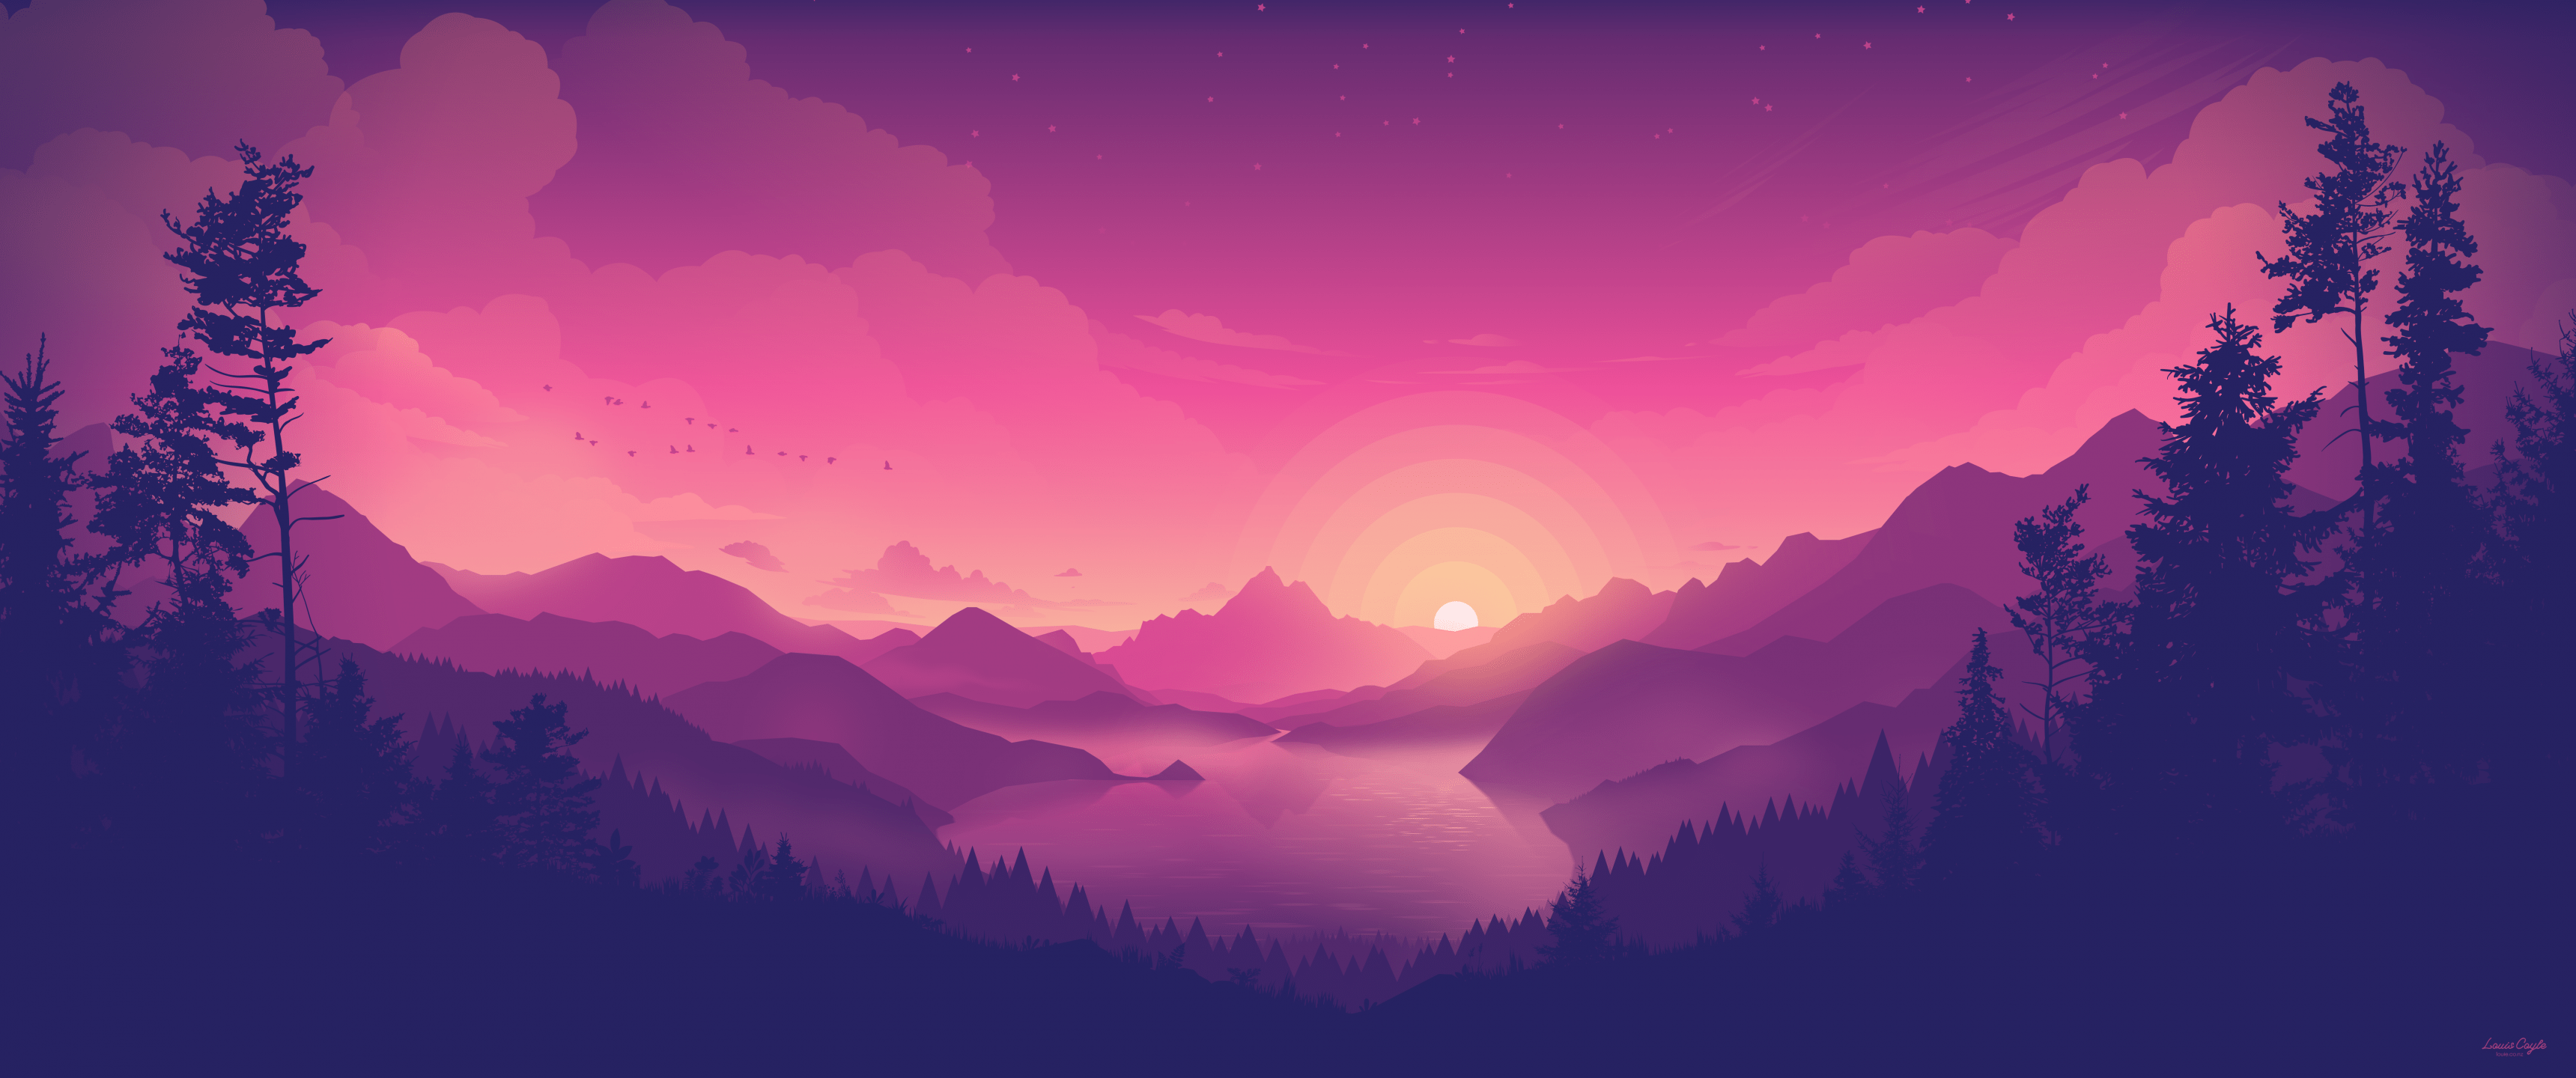 A purple and pink sunset over the mountains - 3440x1440